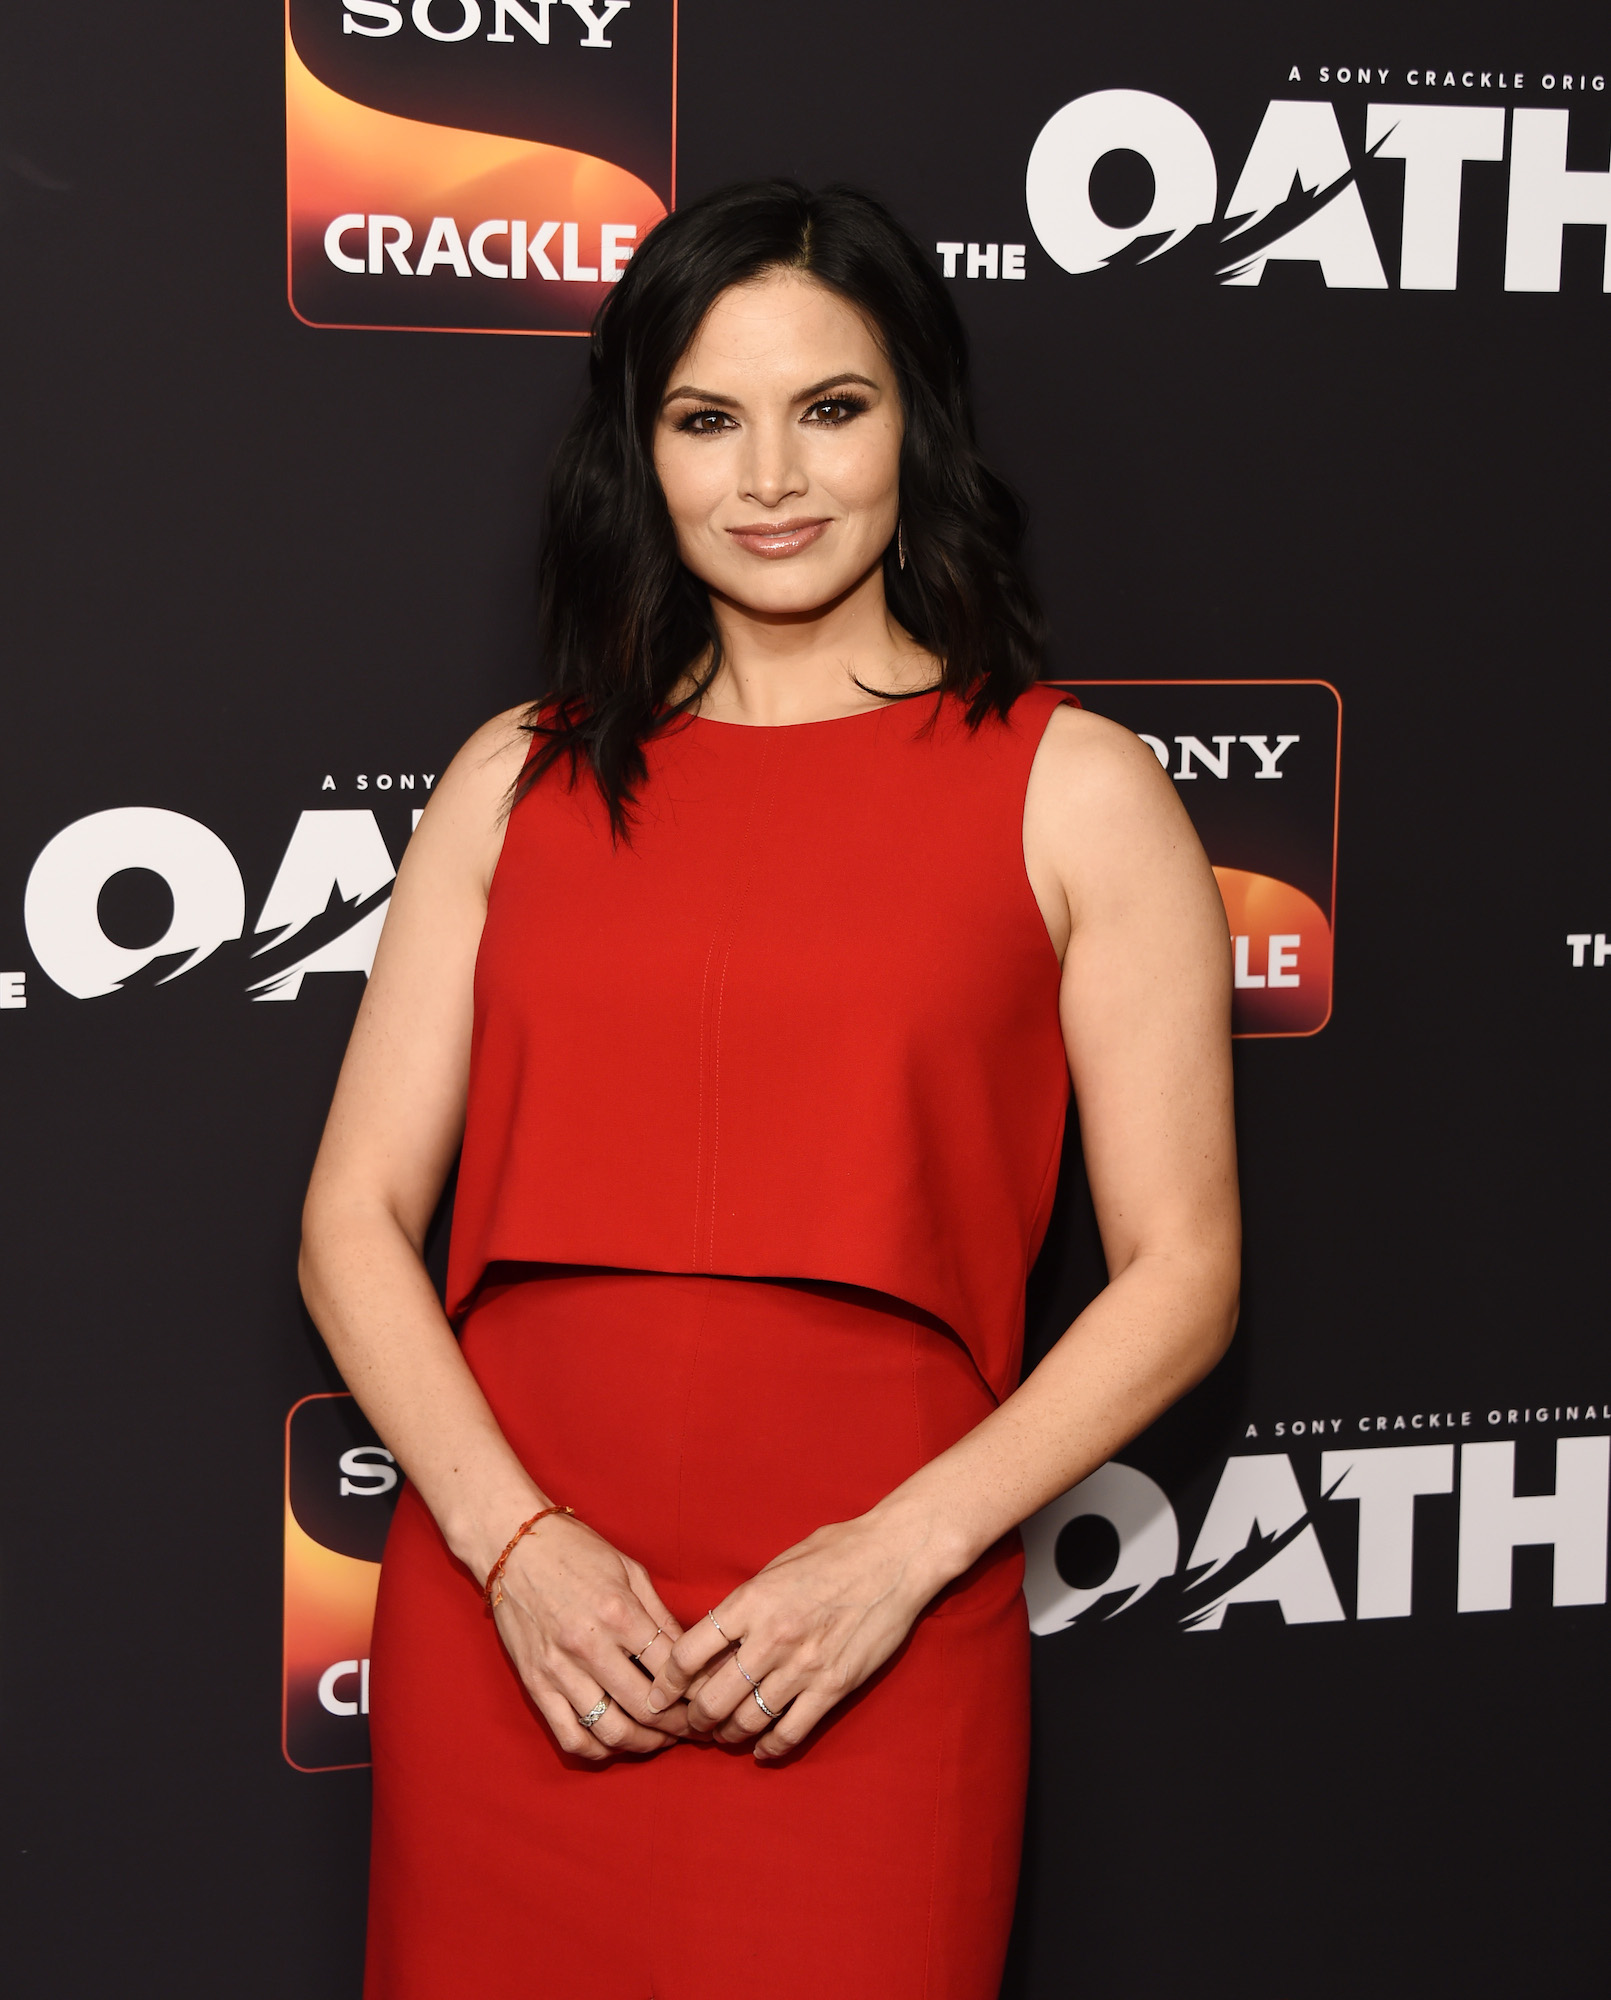 ncis's katrina law: 1000th episode has 'a lot' of nods to past characters